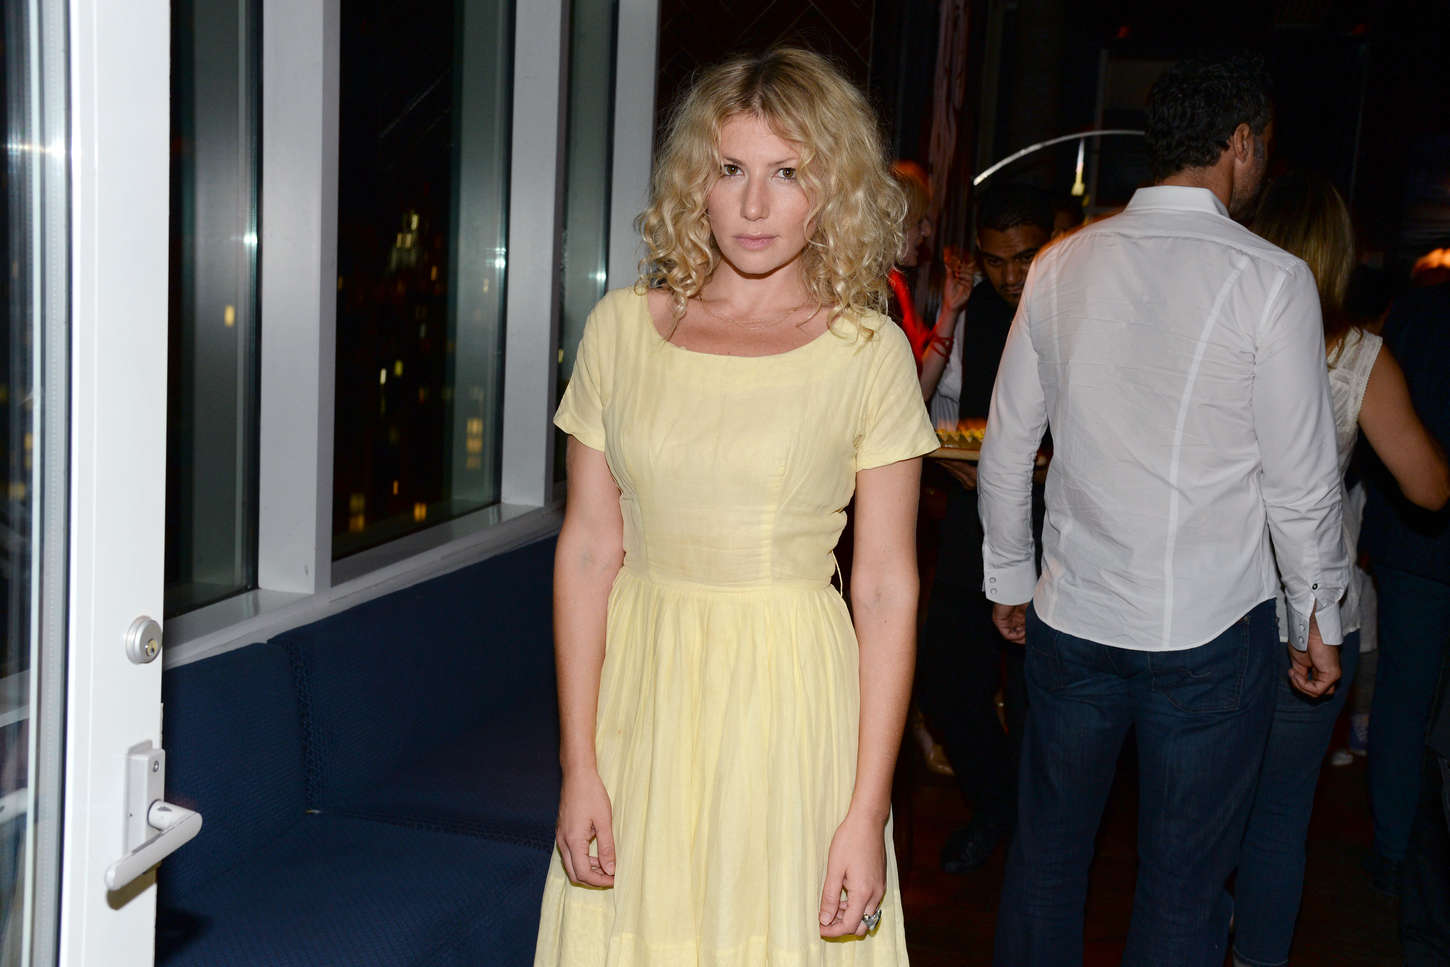 Ari Graynor The Diary of a Teenage Girl After Party in New York